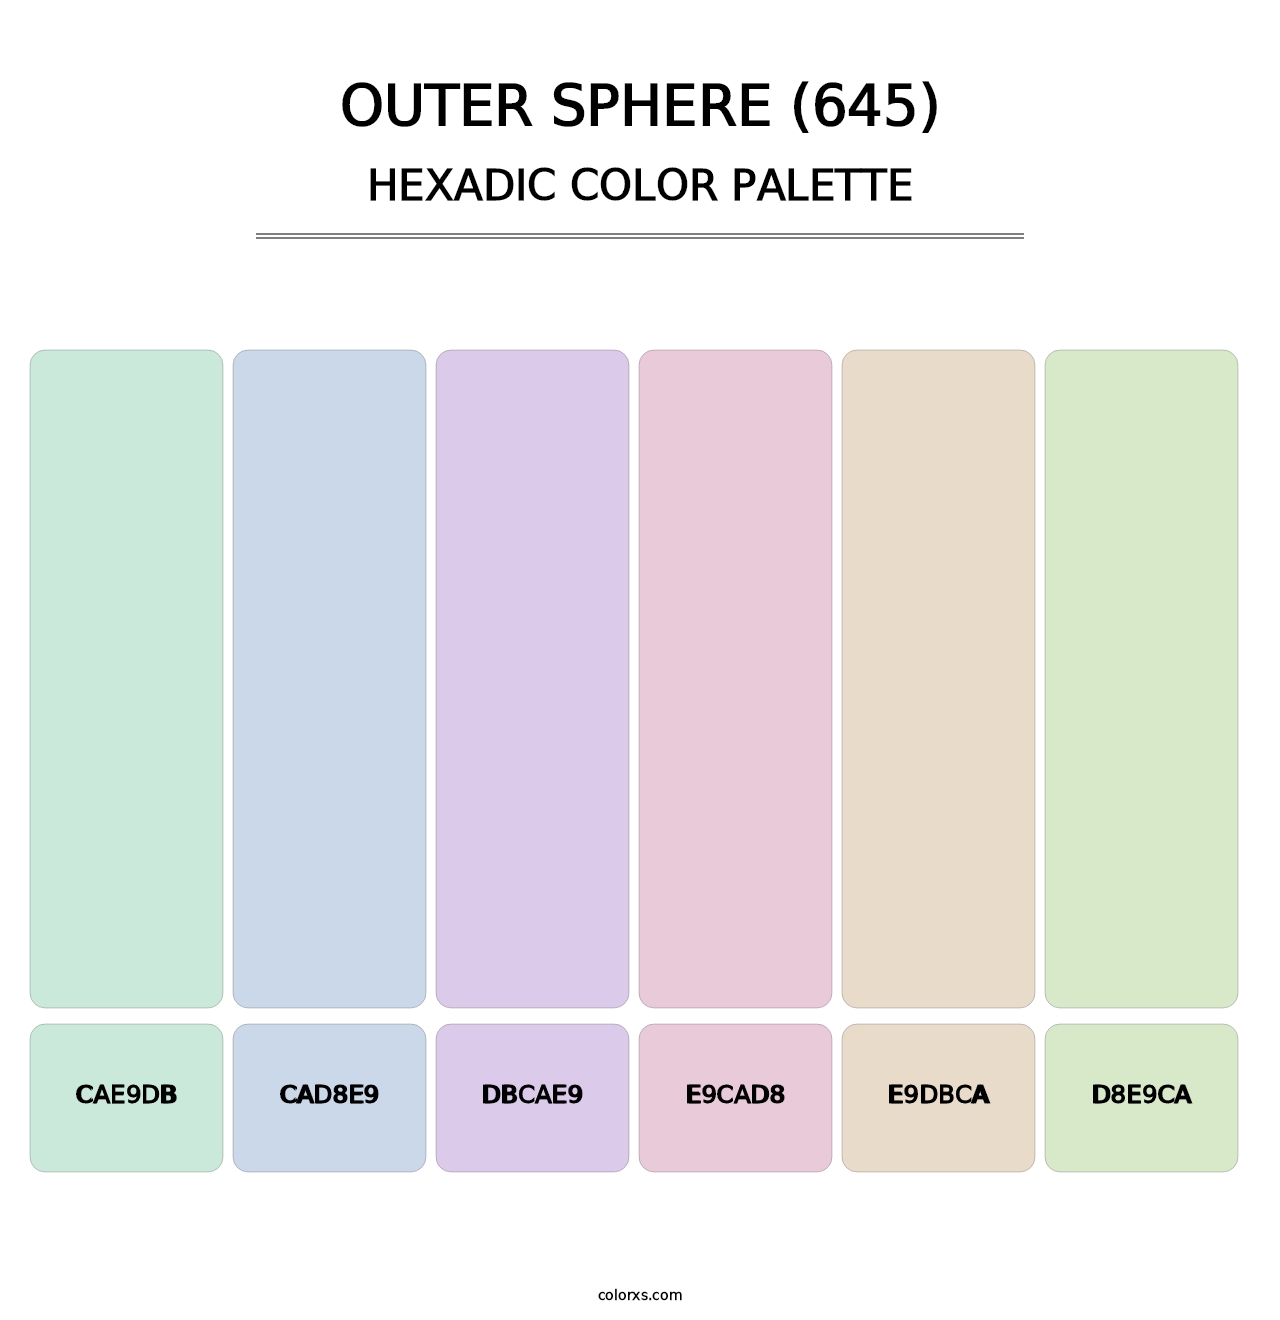 Outer Sphere (645) - Hexadic Color Palette